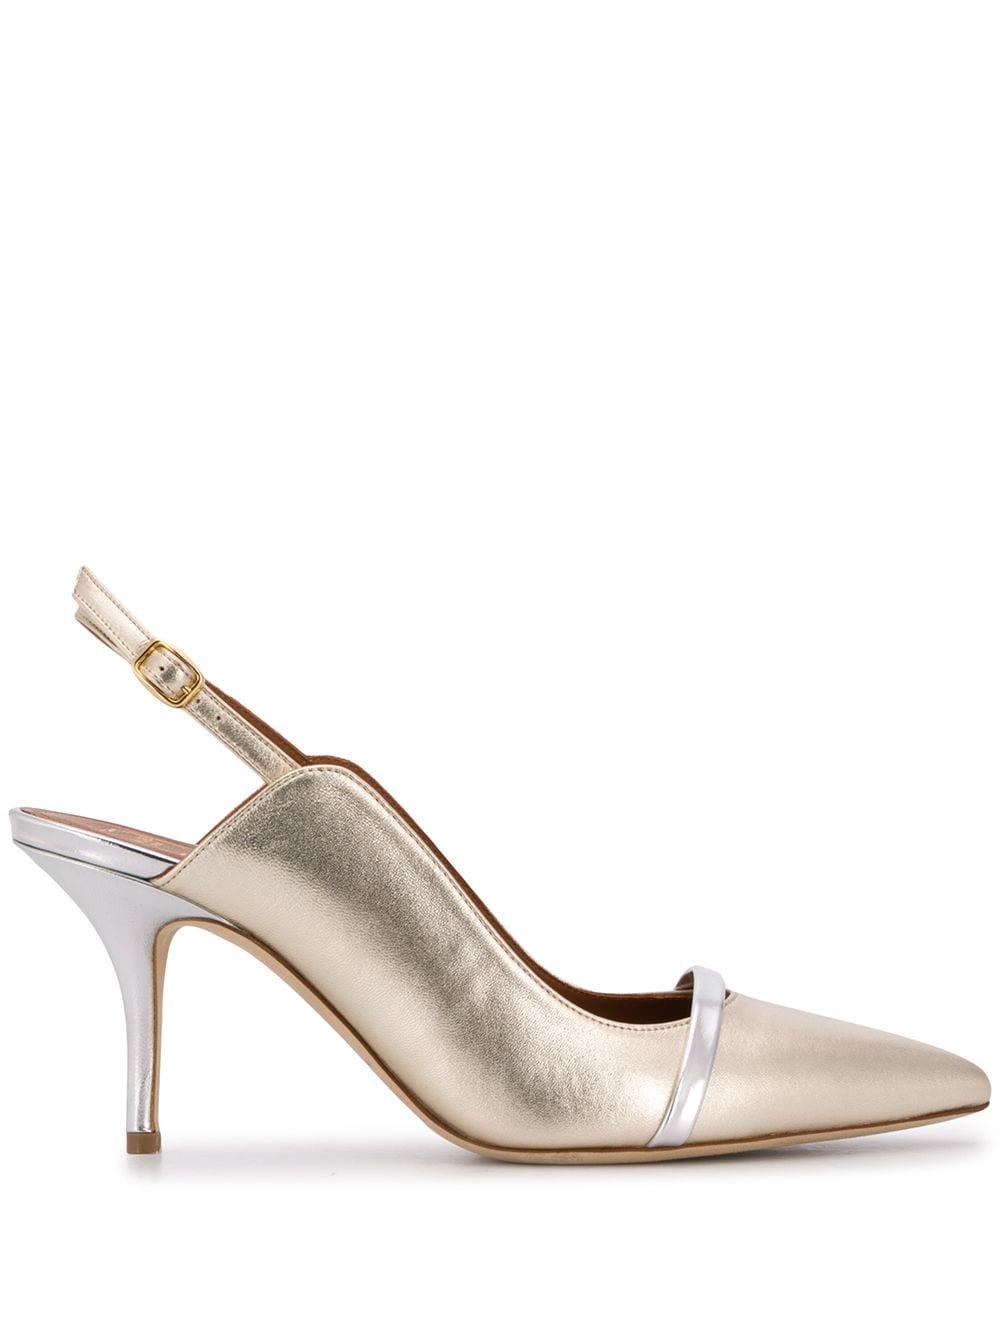 Malone Souliers pointed toe heels - Silver von Malone Souliers